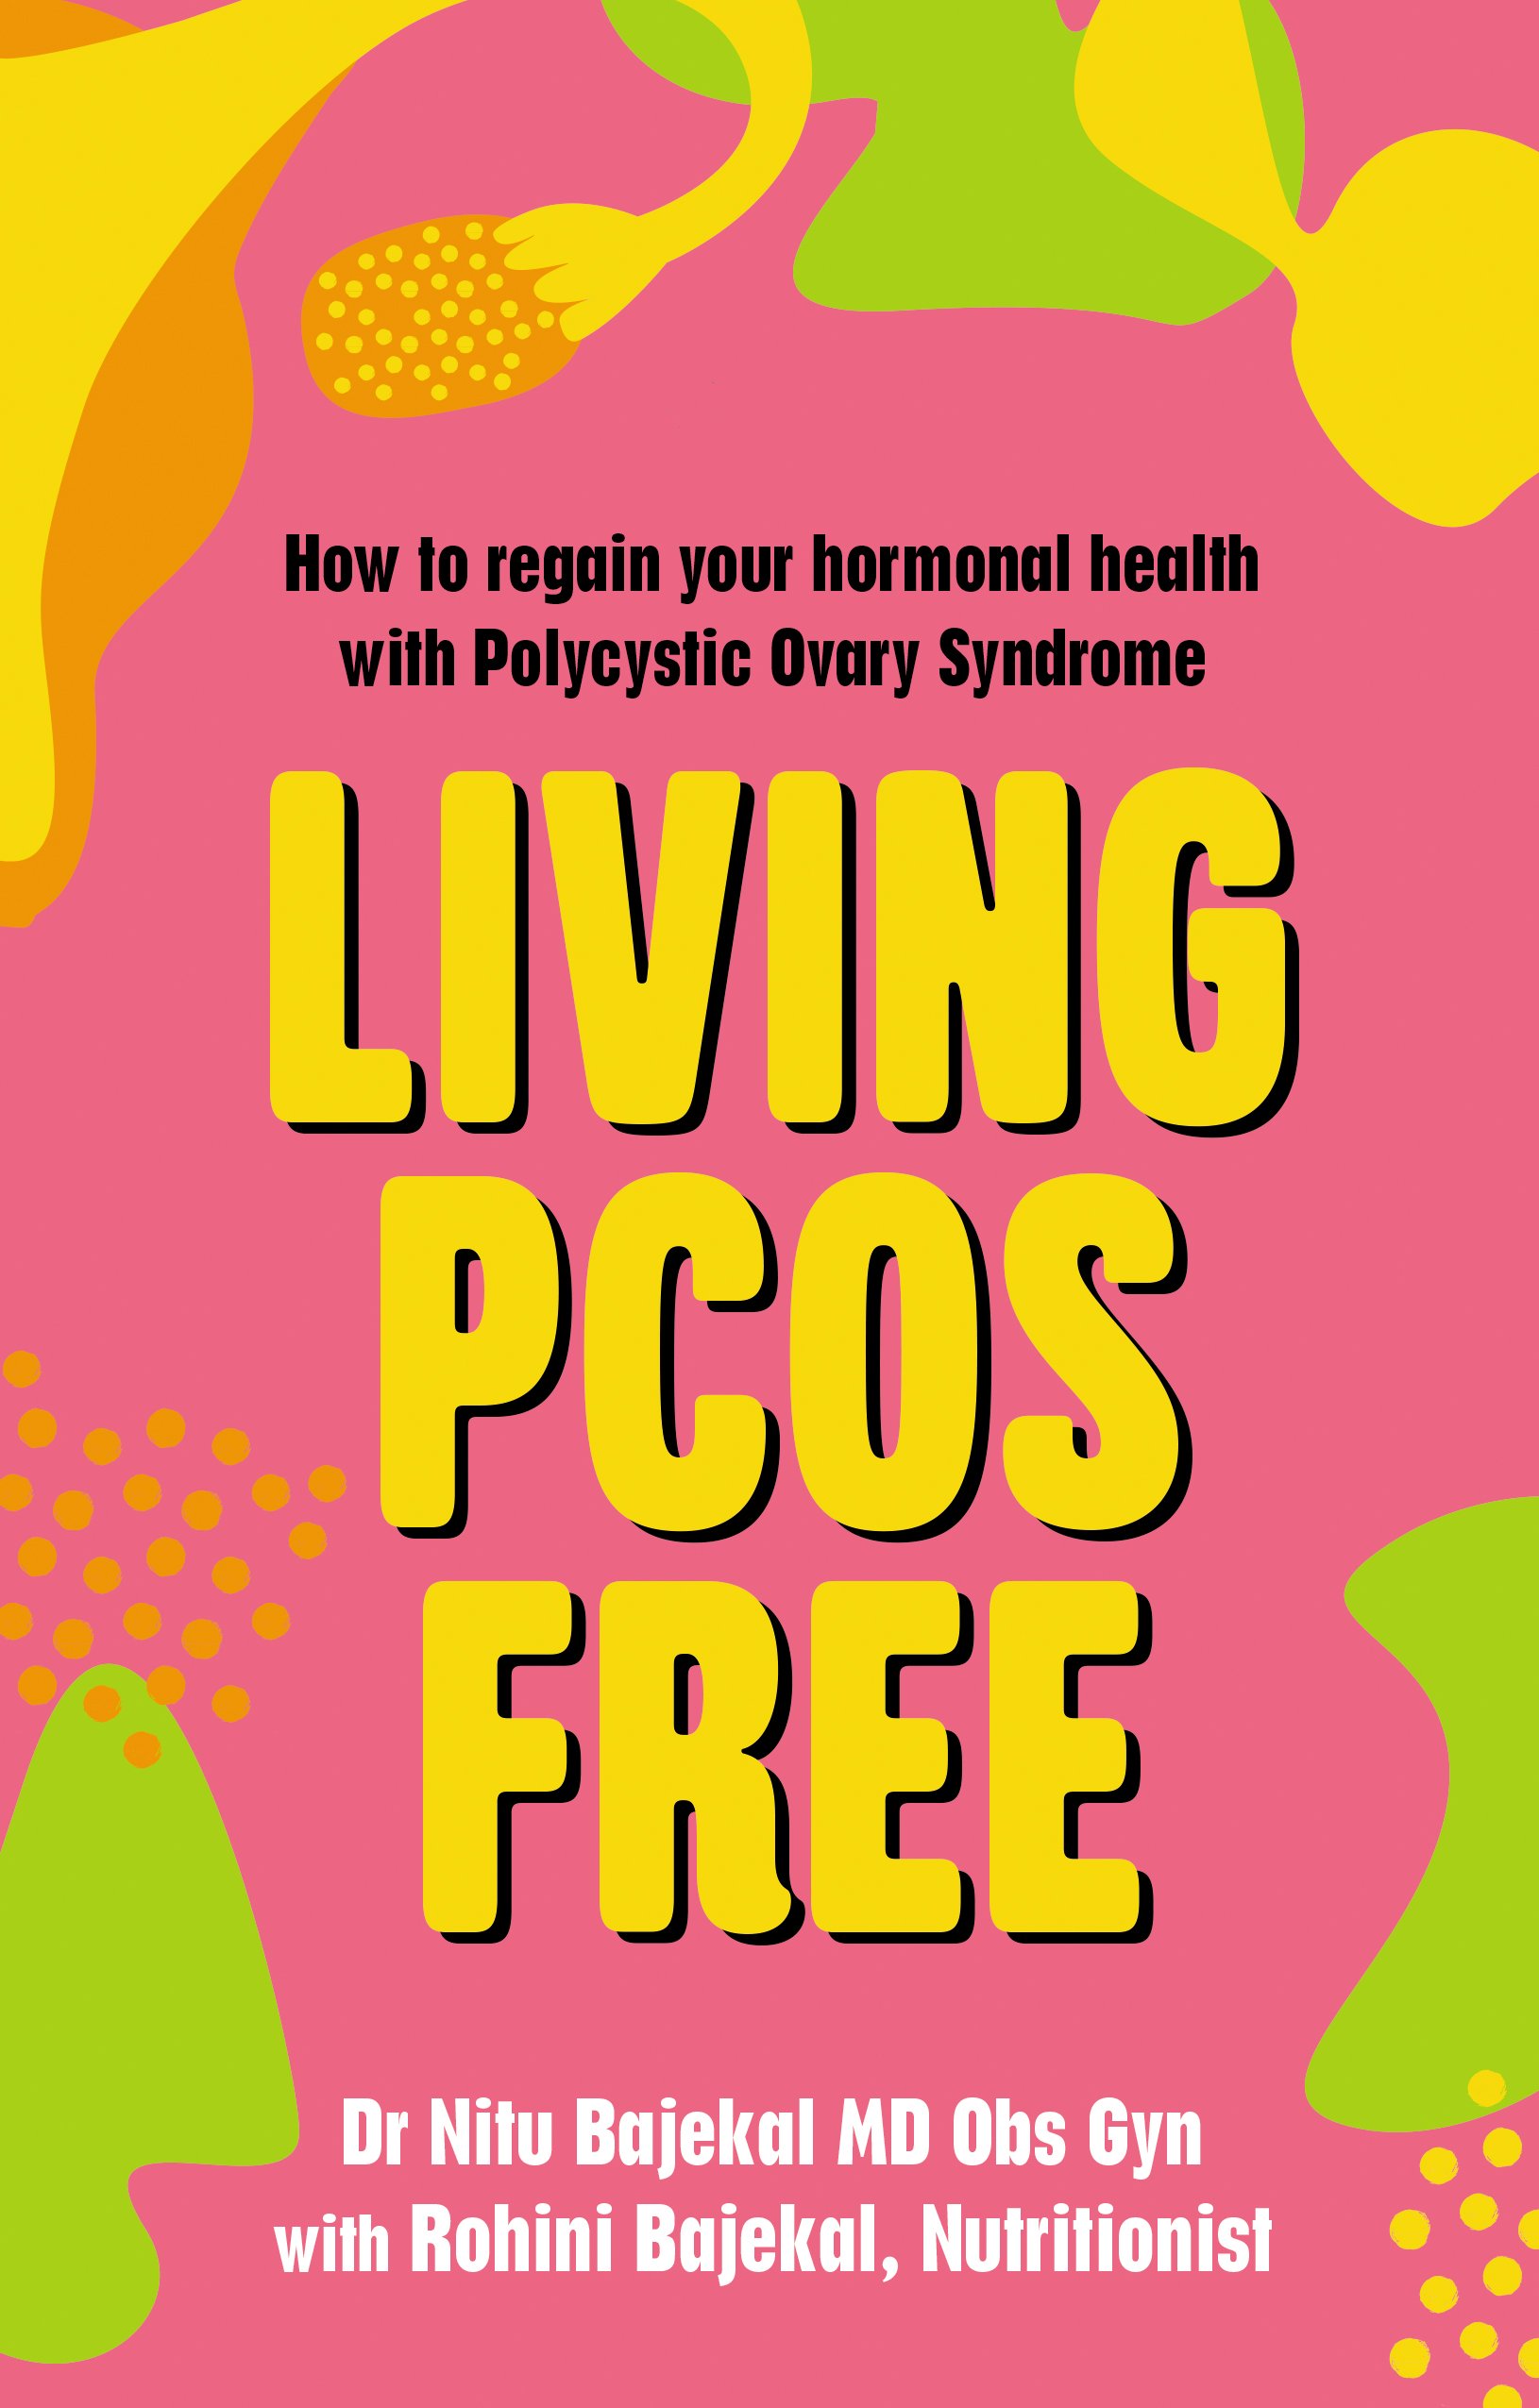 What Type of PCOS do You Have? — The Hormone Dietitian